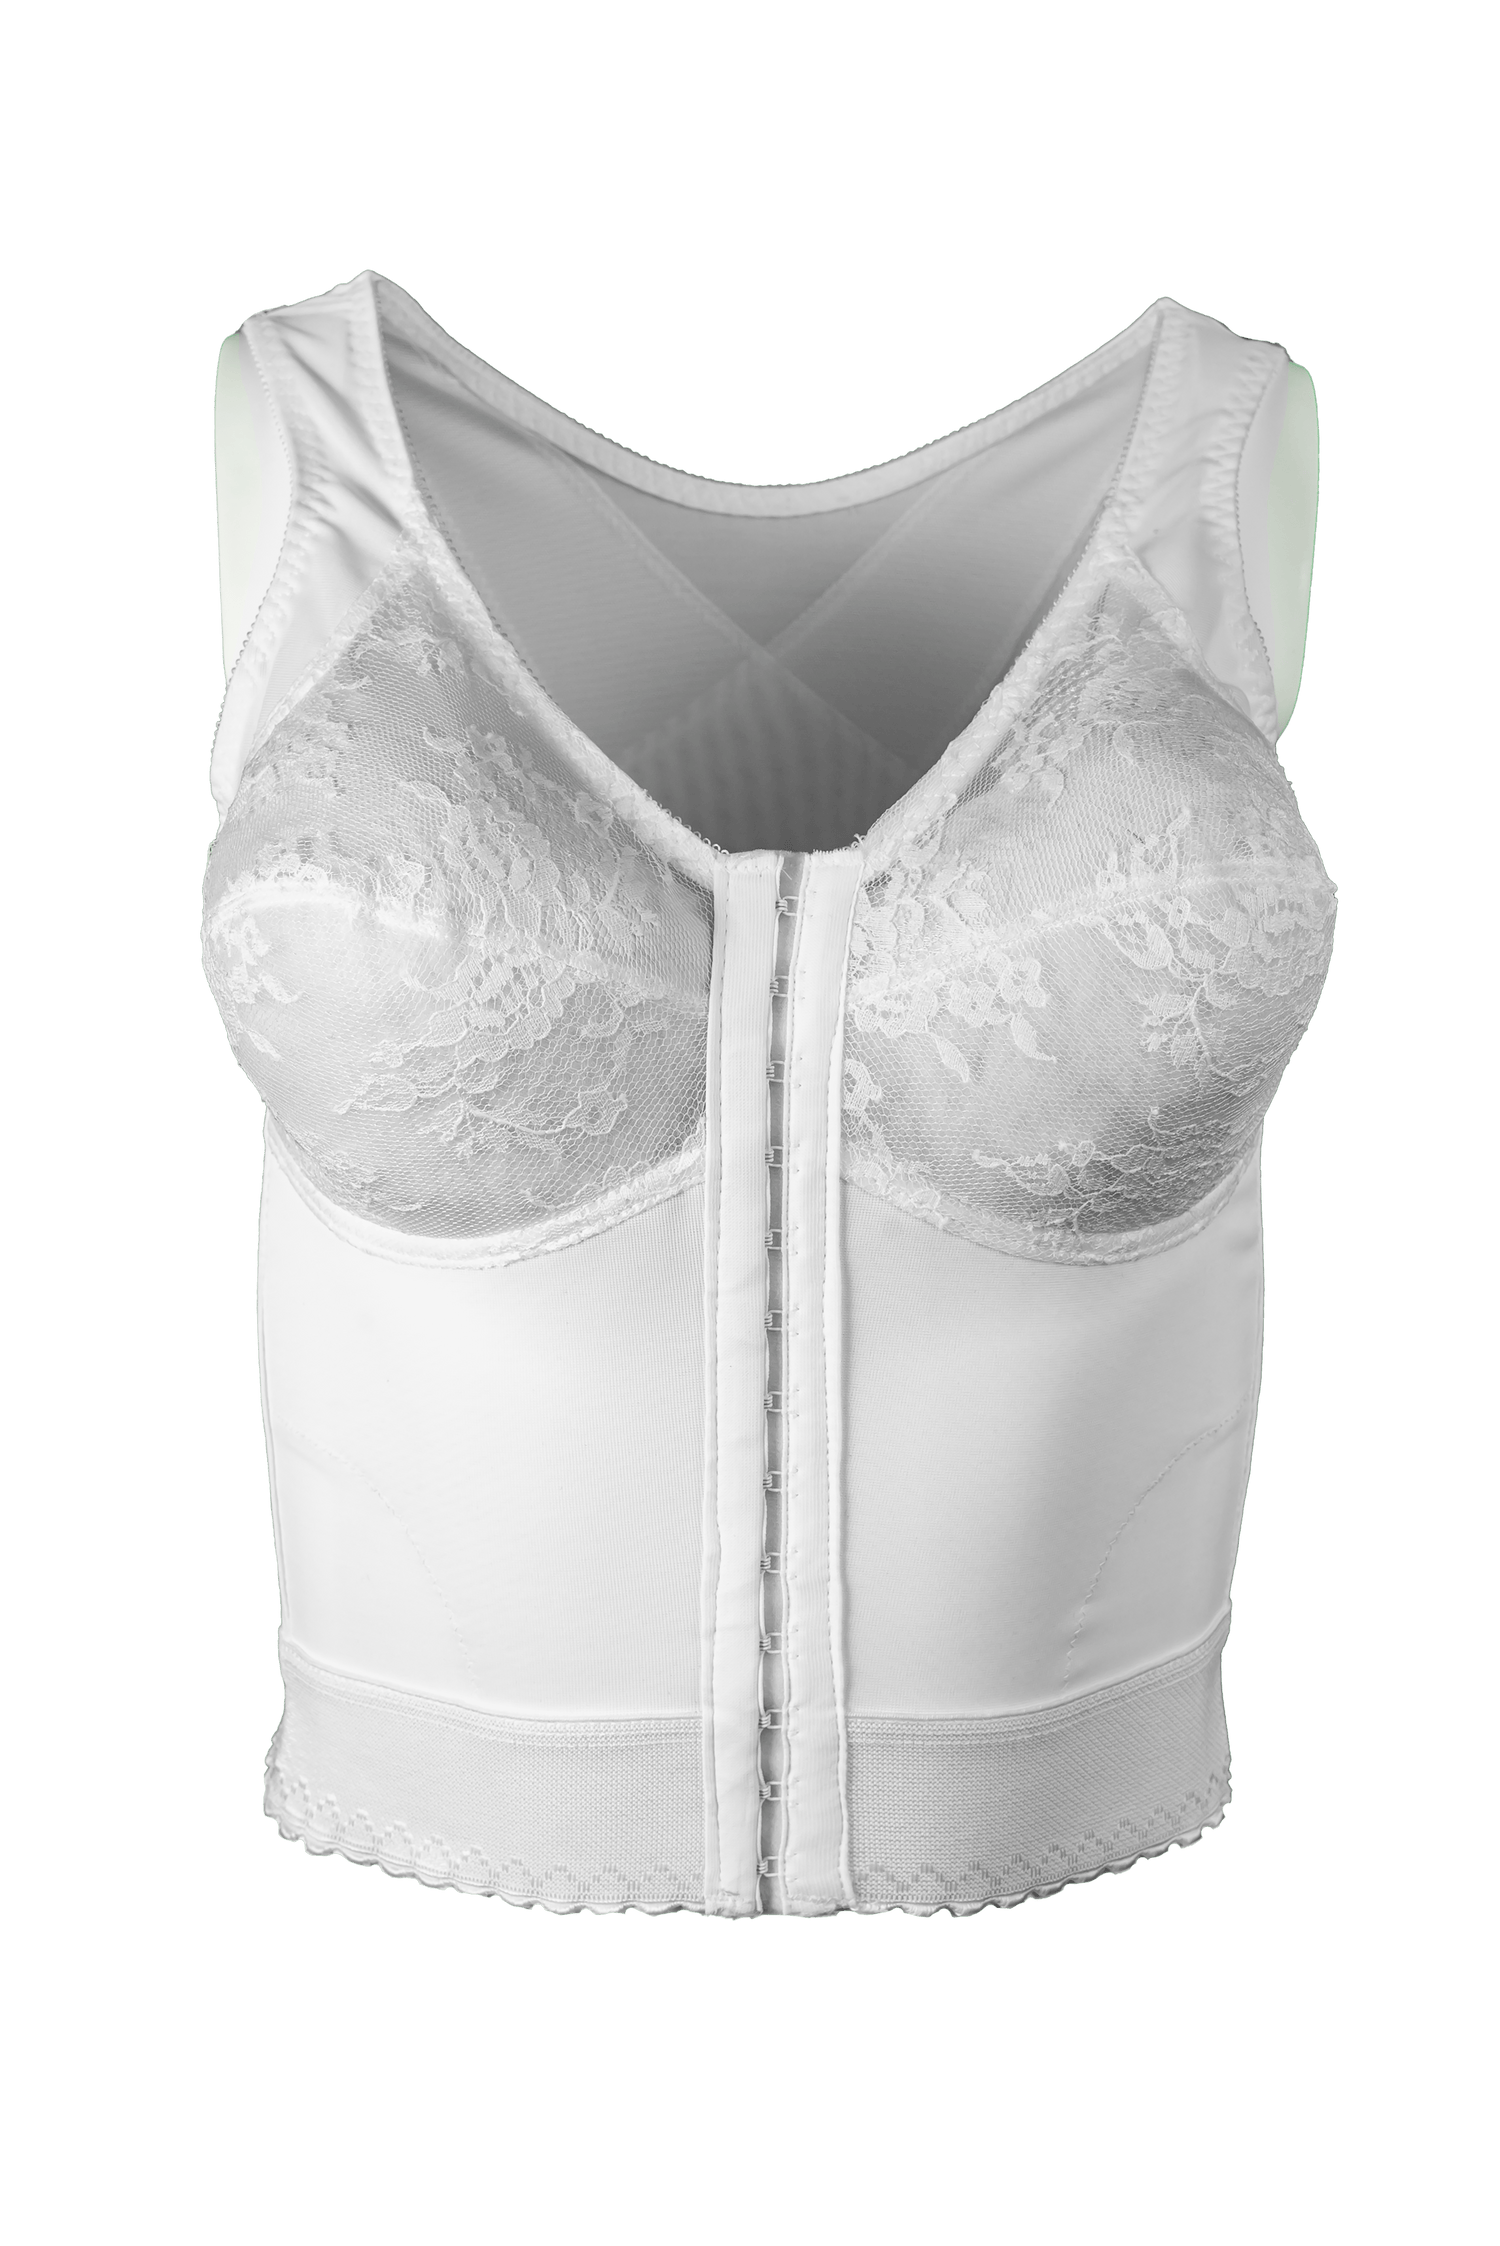 Cathalem Longline Full Coverage Bra with Back and Side Support Wemon's Bras  Support(White,L) 